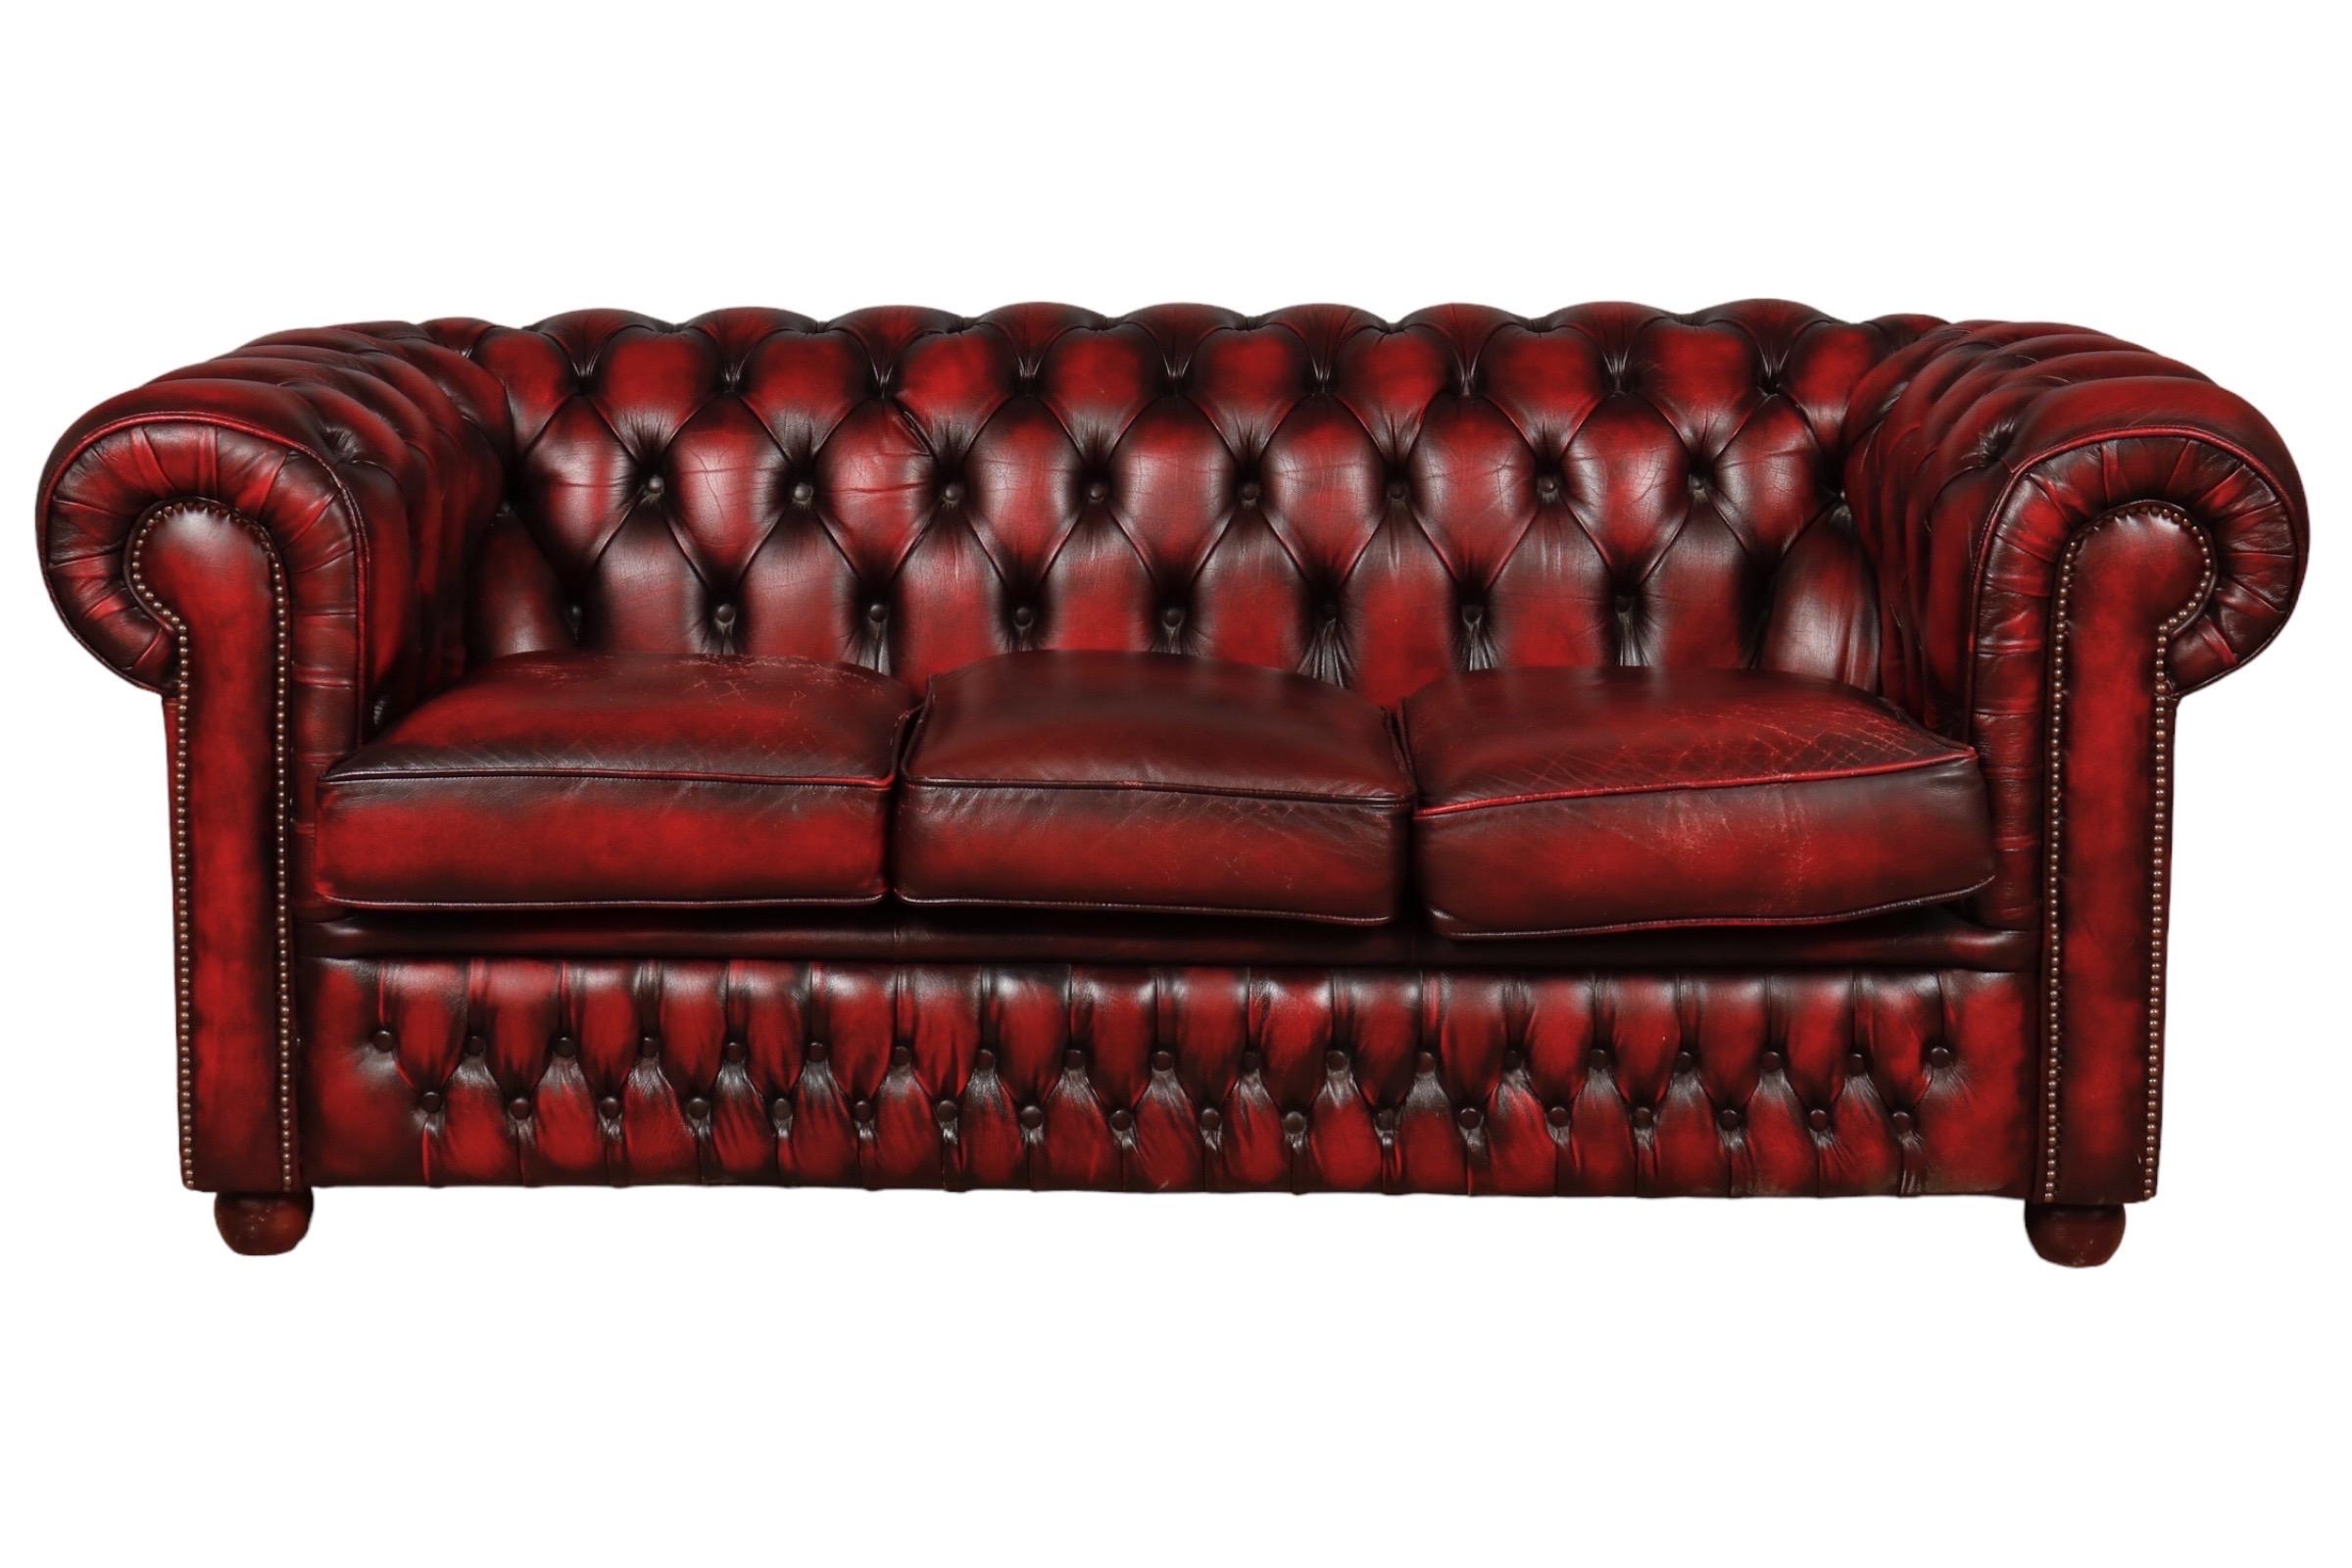 An English three seater Chesterfield sofa upholstered in oxblood red leather.  Diamond tufted on the back and front skirt, secured with a brass nailhead trim. Finished with wooden bun feet.
